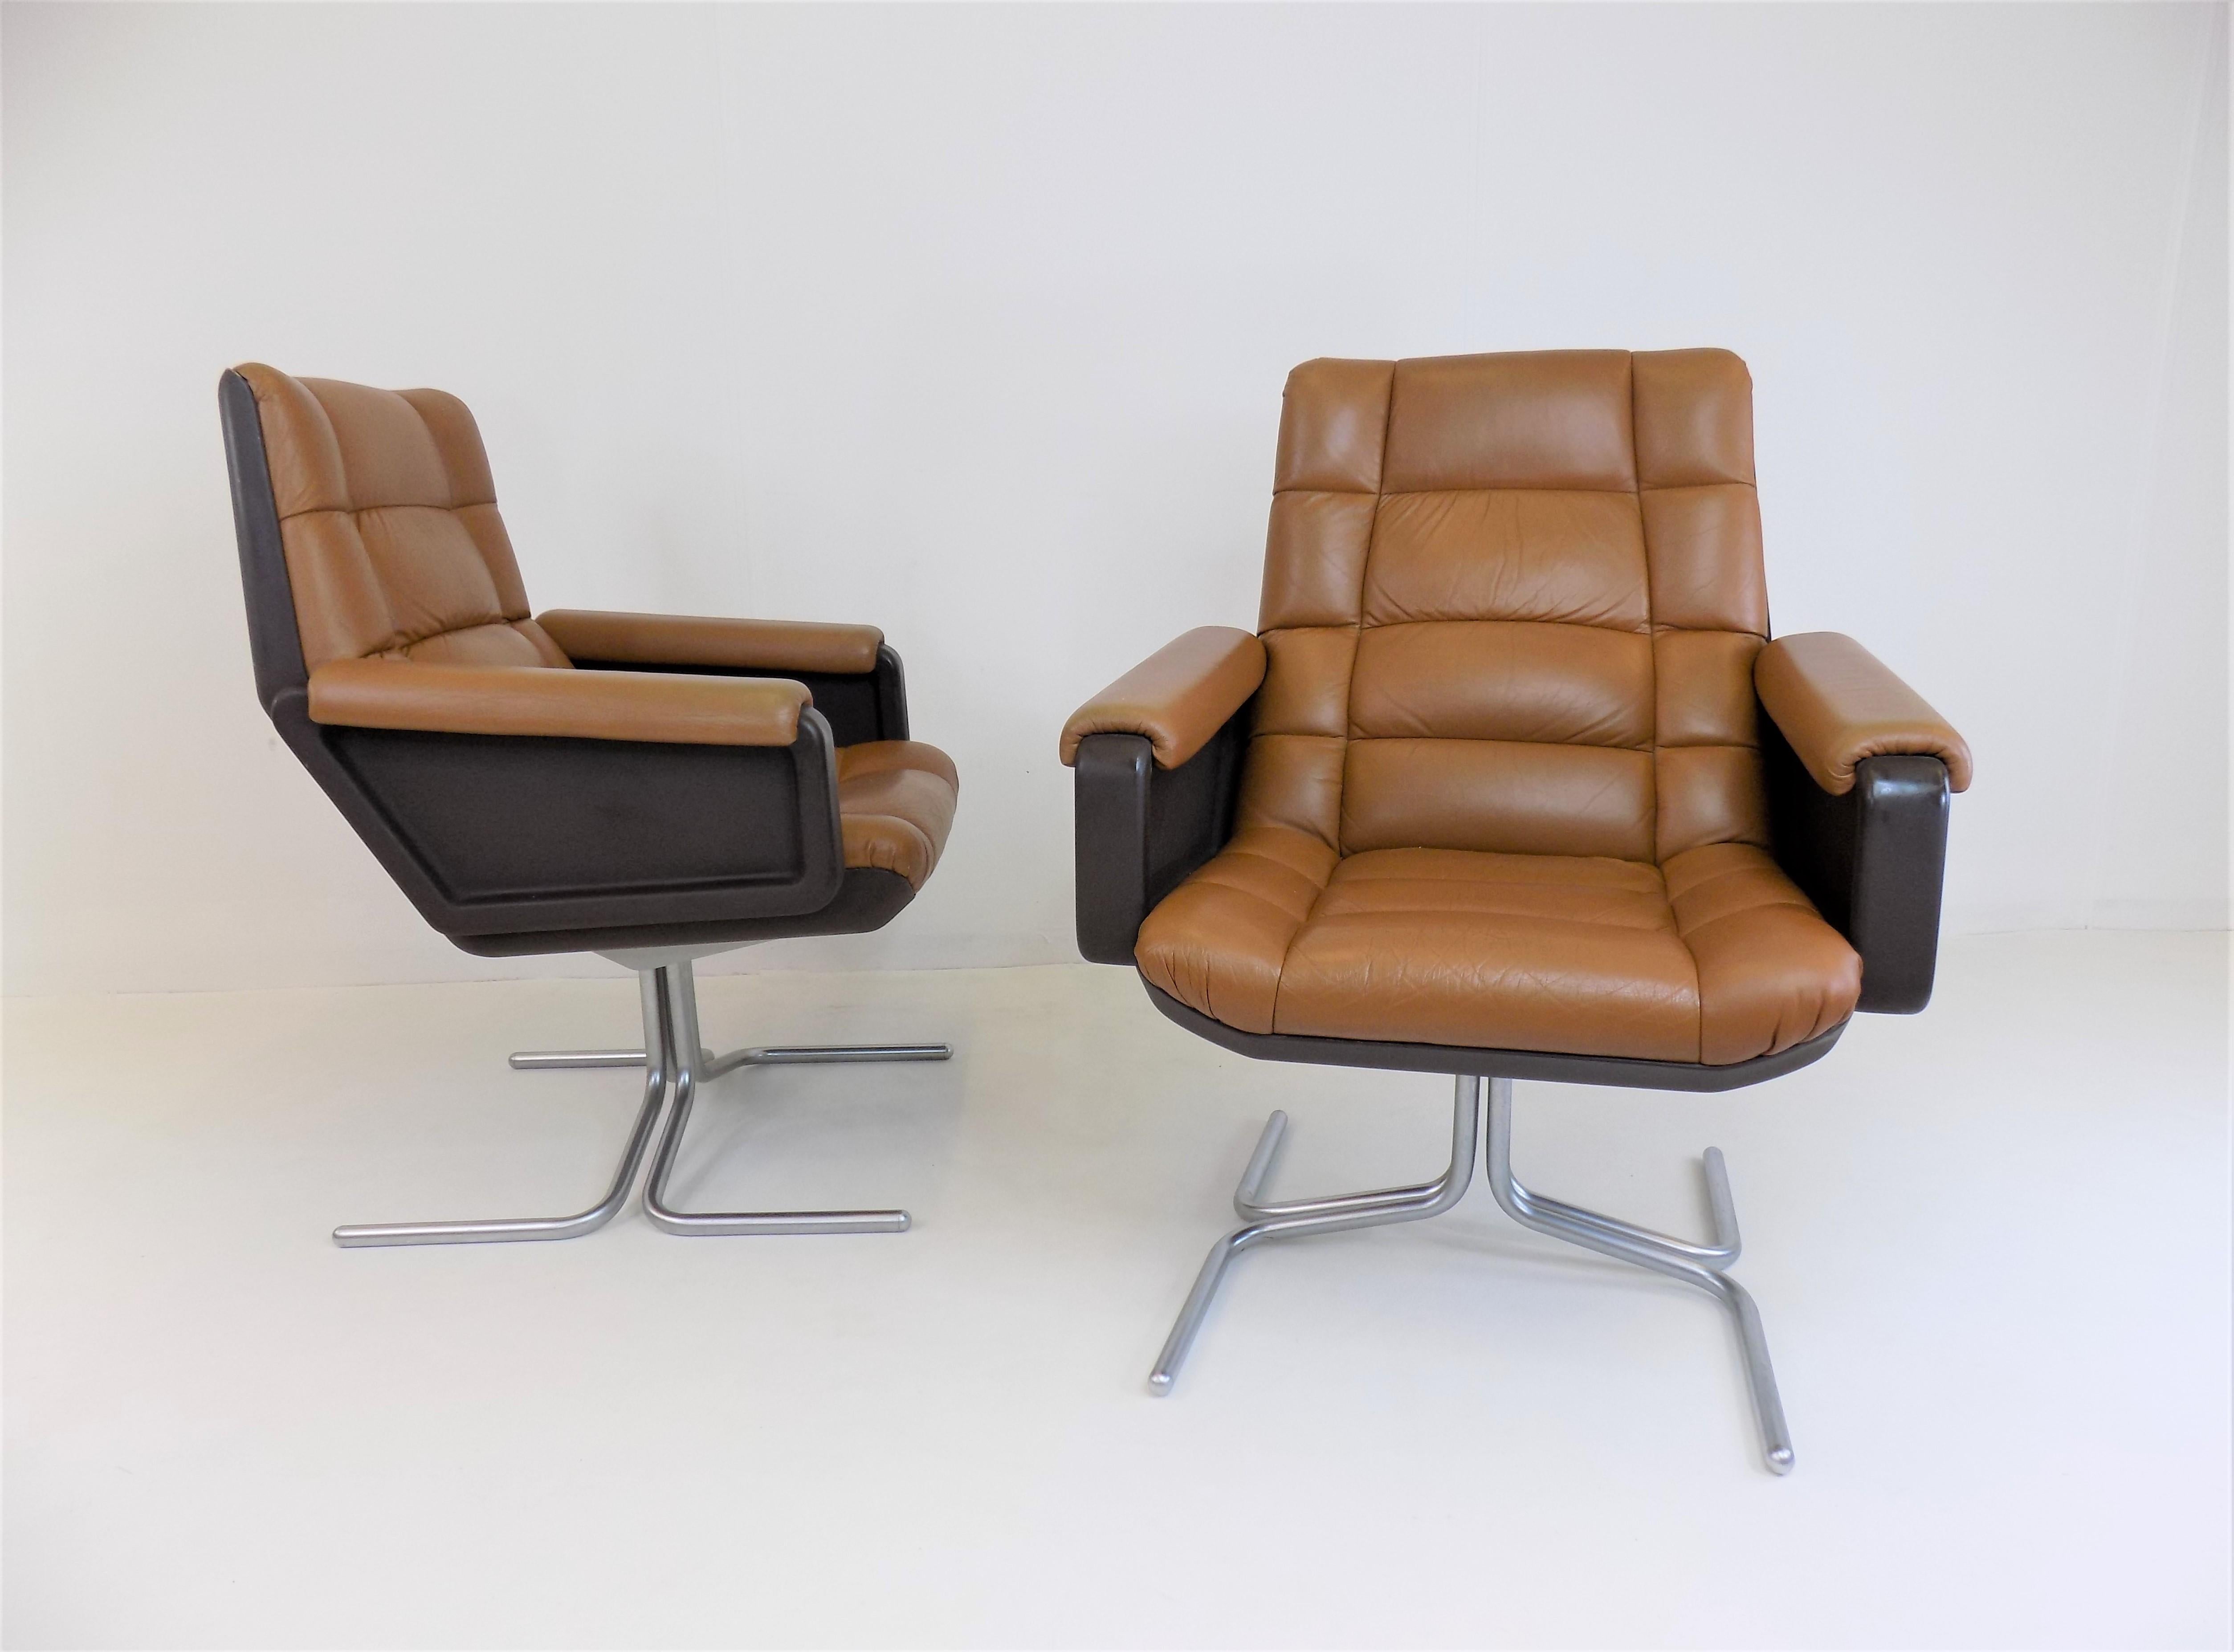 These two Seat 150 leather armchairs are fantastic representatives of the Space Age. The soft, cognac-colored and quilted leather is in very good condition. The brown plastic shells of the backrests show slight signs of wear. The metal base typical